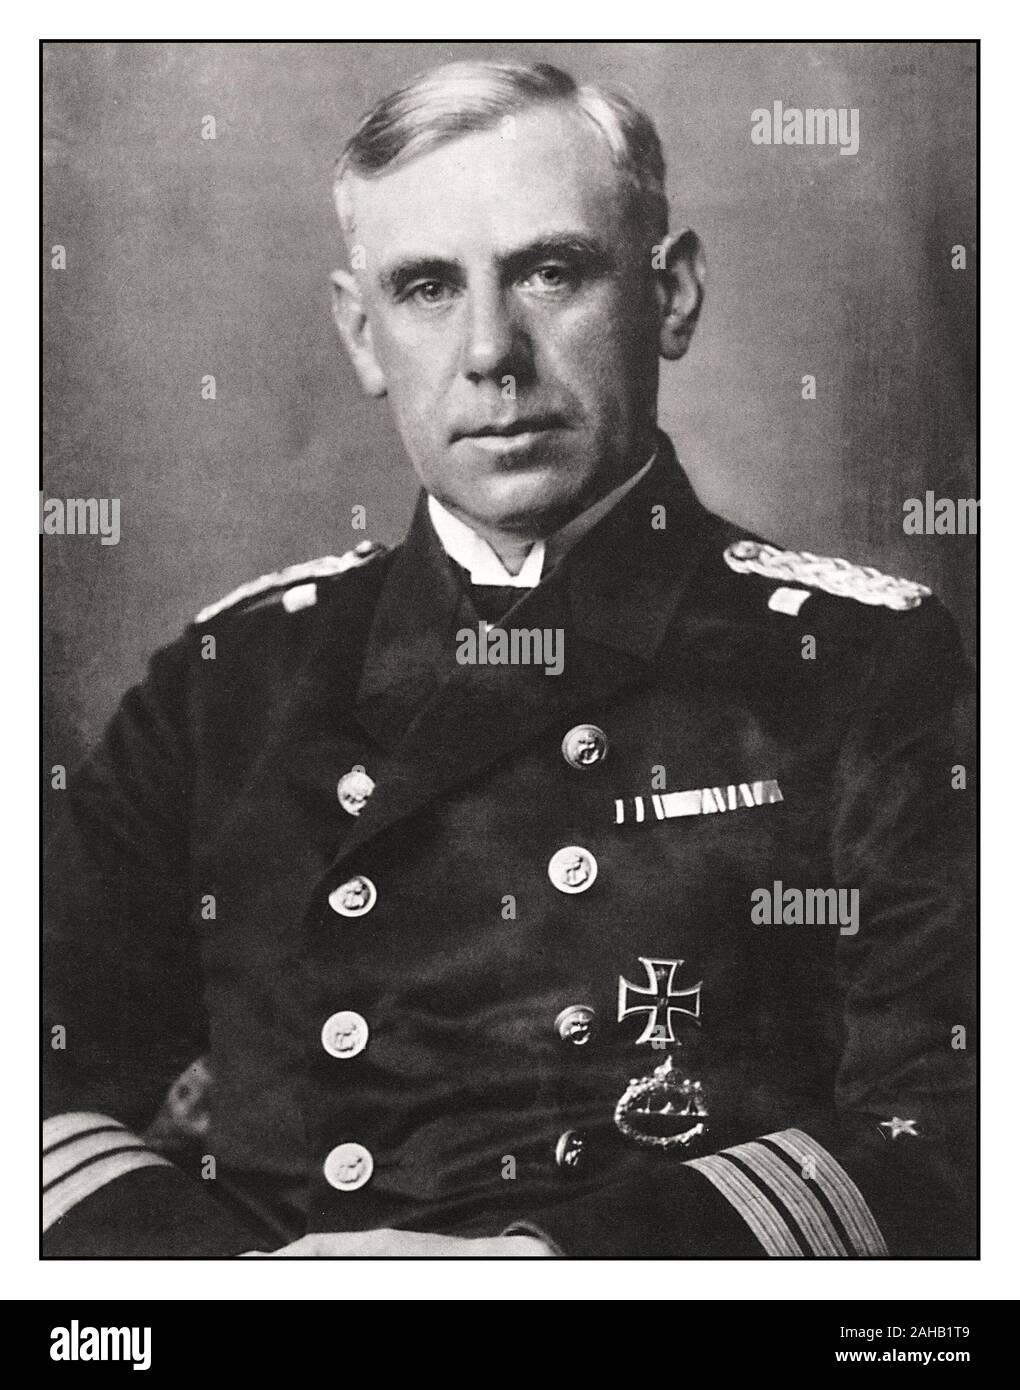 Admiral Wilhelm Franz Canaris (1887 –1945) was chief of the Abwehr, the  Nazi German military intelligence service, from 1935 to 1944. He was among the military officers involved in the clandestine opposition to Adolf Hitler and the Nazi regime. He was executed in the Flossenbürg concentration camp for the act of high treason after the failed attempt of the opposition to assassinate Hitler on July 20, 1944 Stock Photo